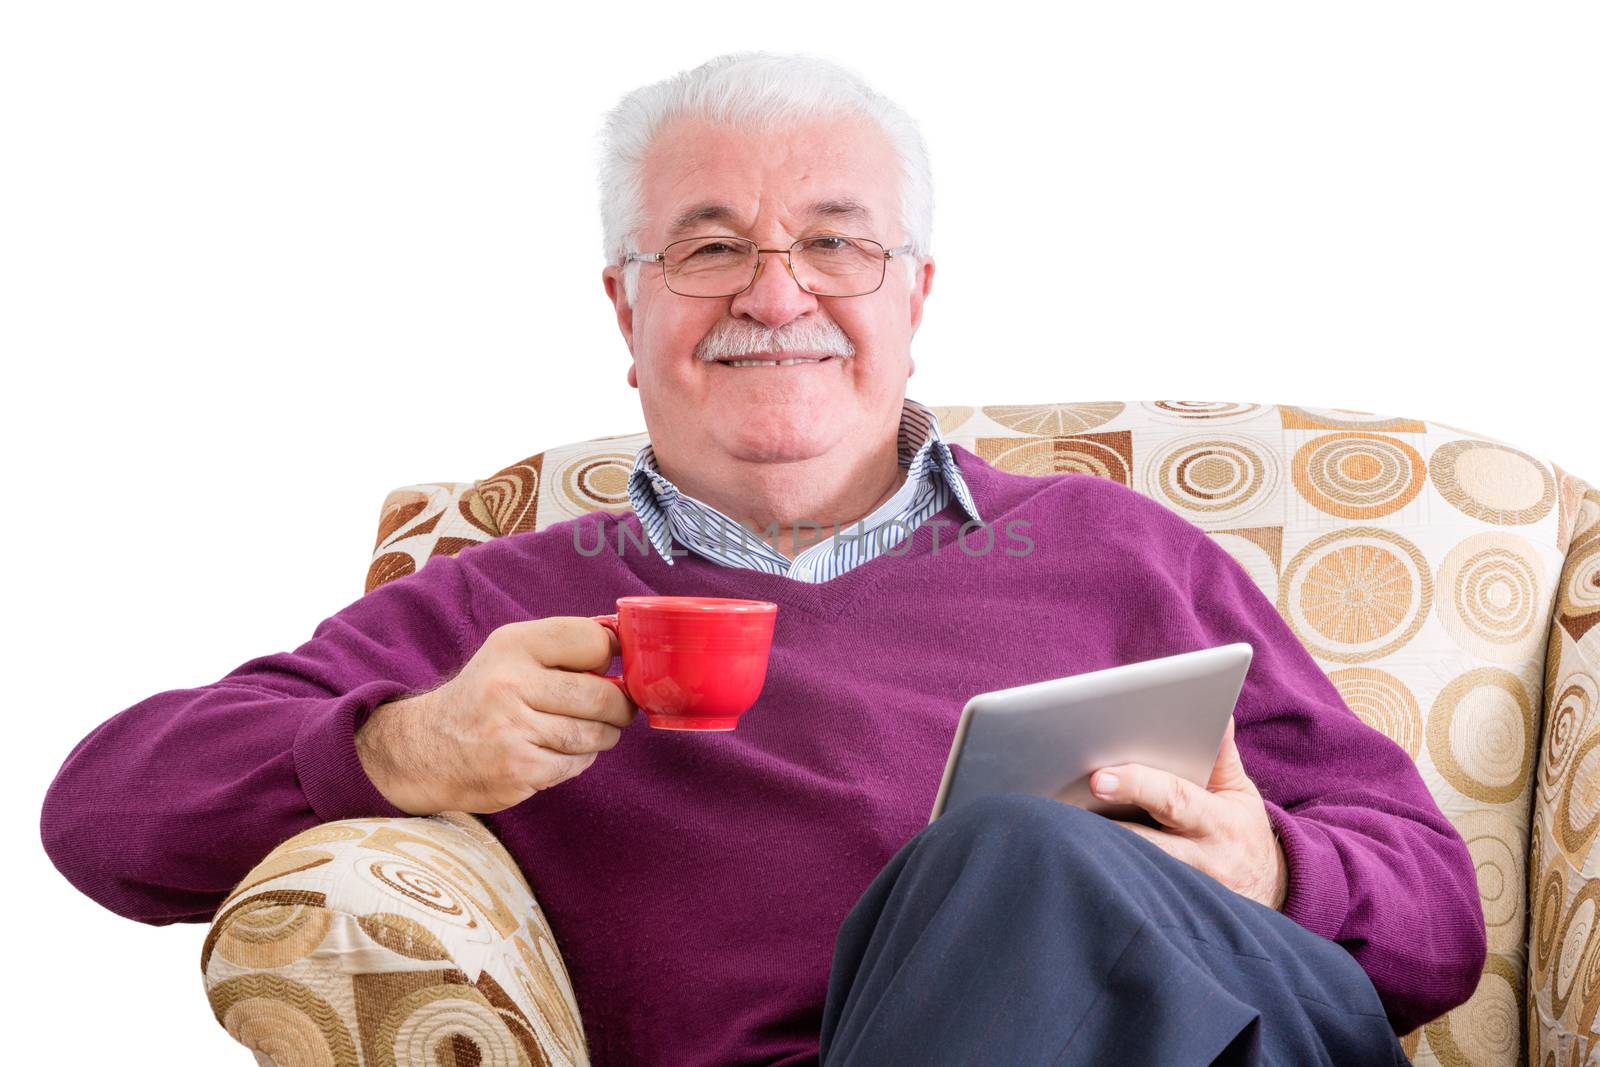 Cheerful senior male in purple sweater holding tablet computer in one hand and a red mug in the other while relaxing in chair over white background